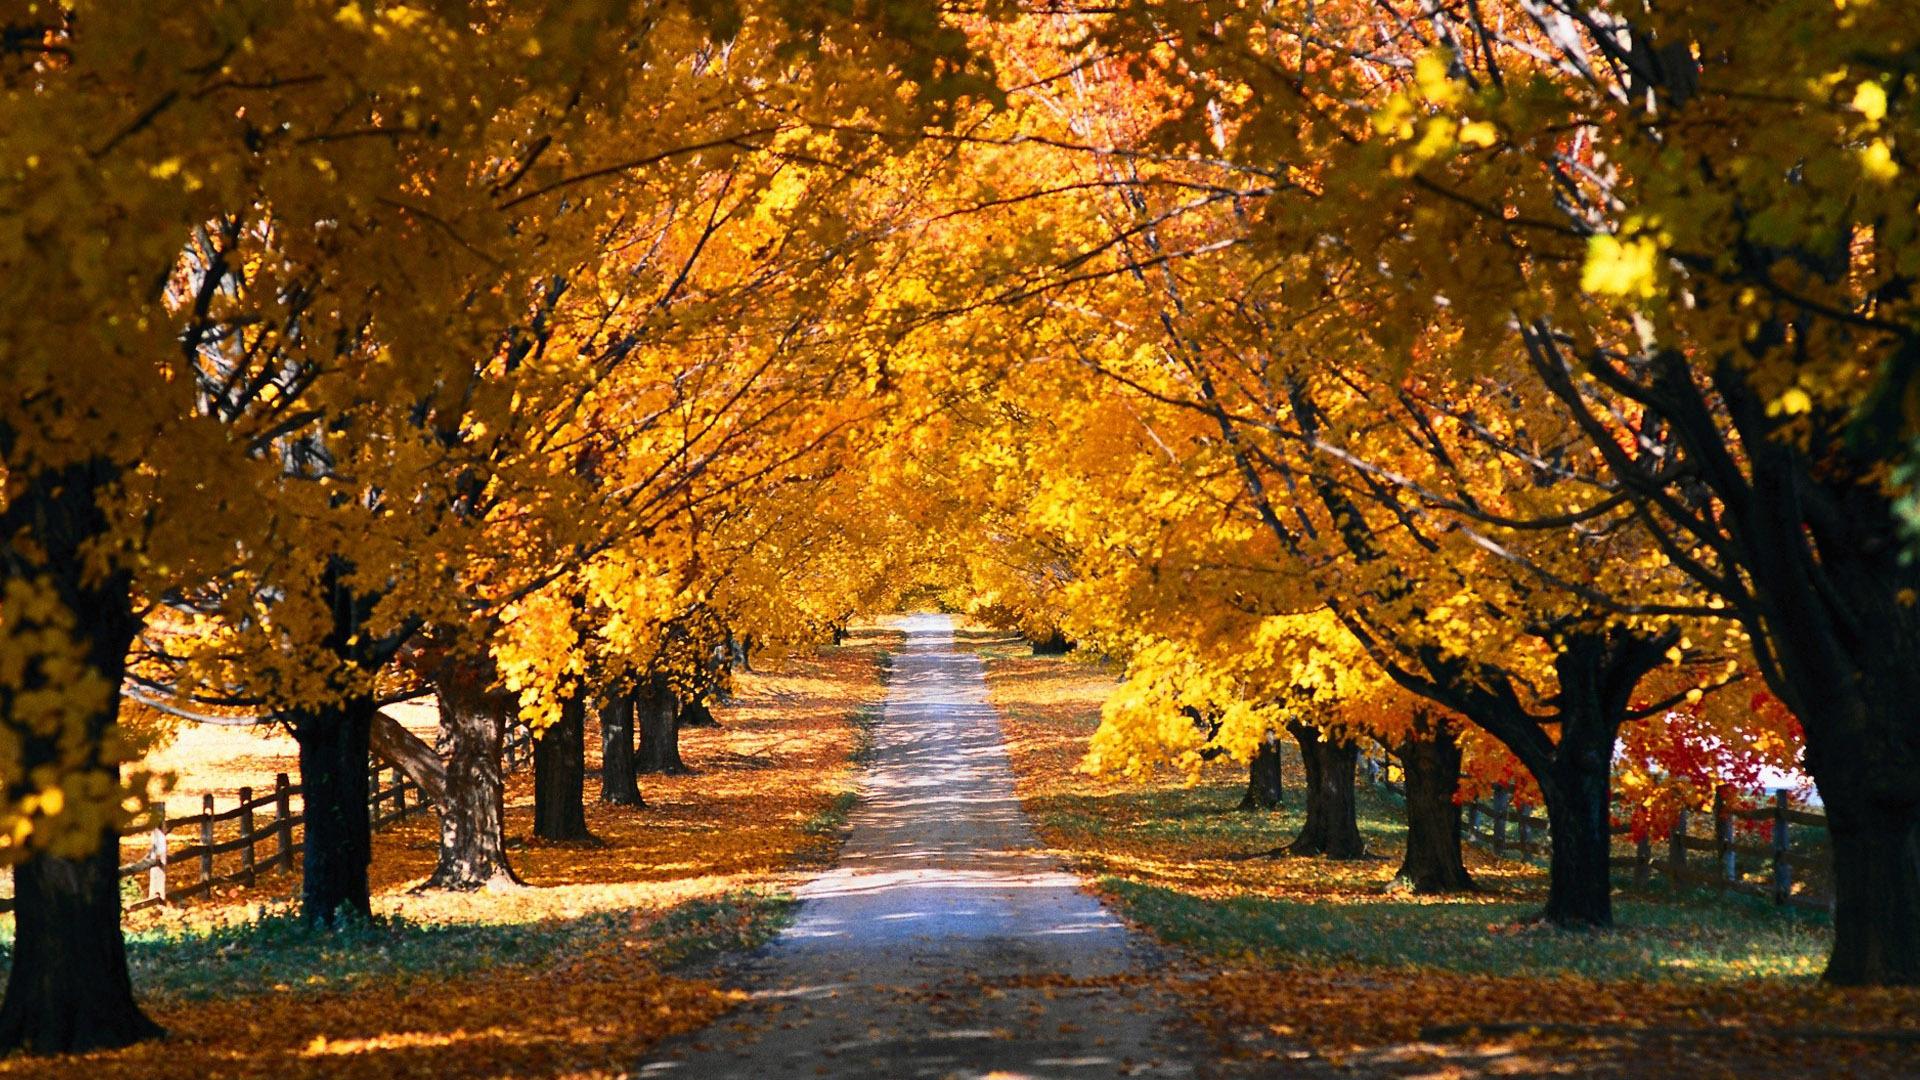 Country Town In Autumn Wallpapers - Wallpaper Cave